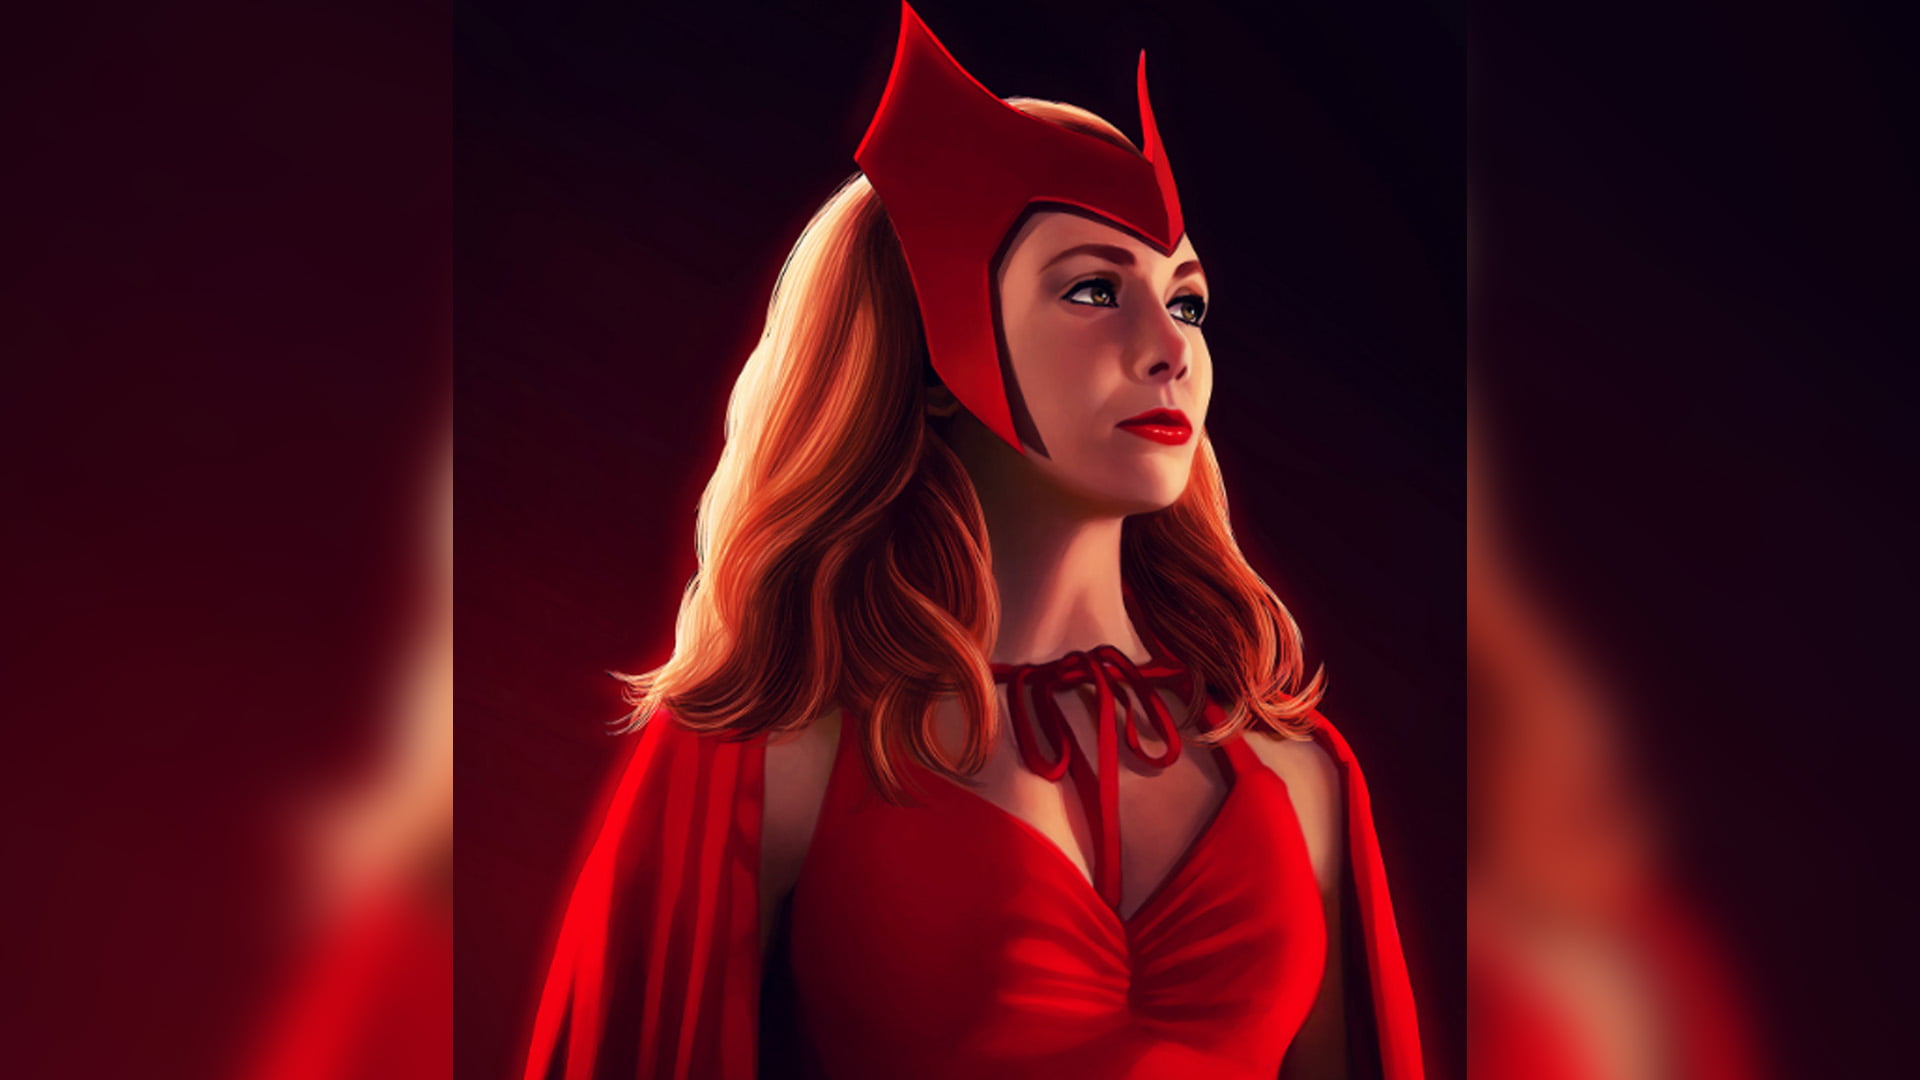 marvel cinematic universe marvel comics scarlet witch vision wanda maximoff hd wallpaper d910c87d611a7dabe657b8ef2011867d